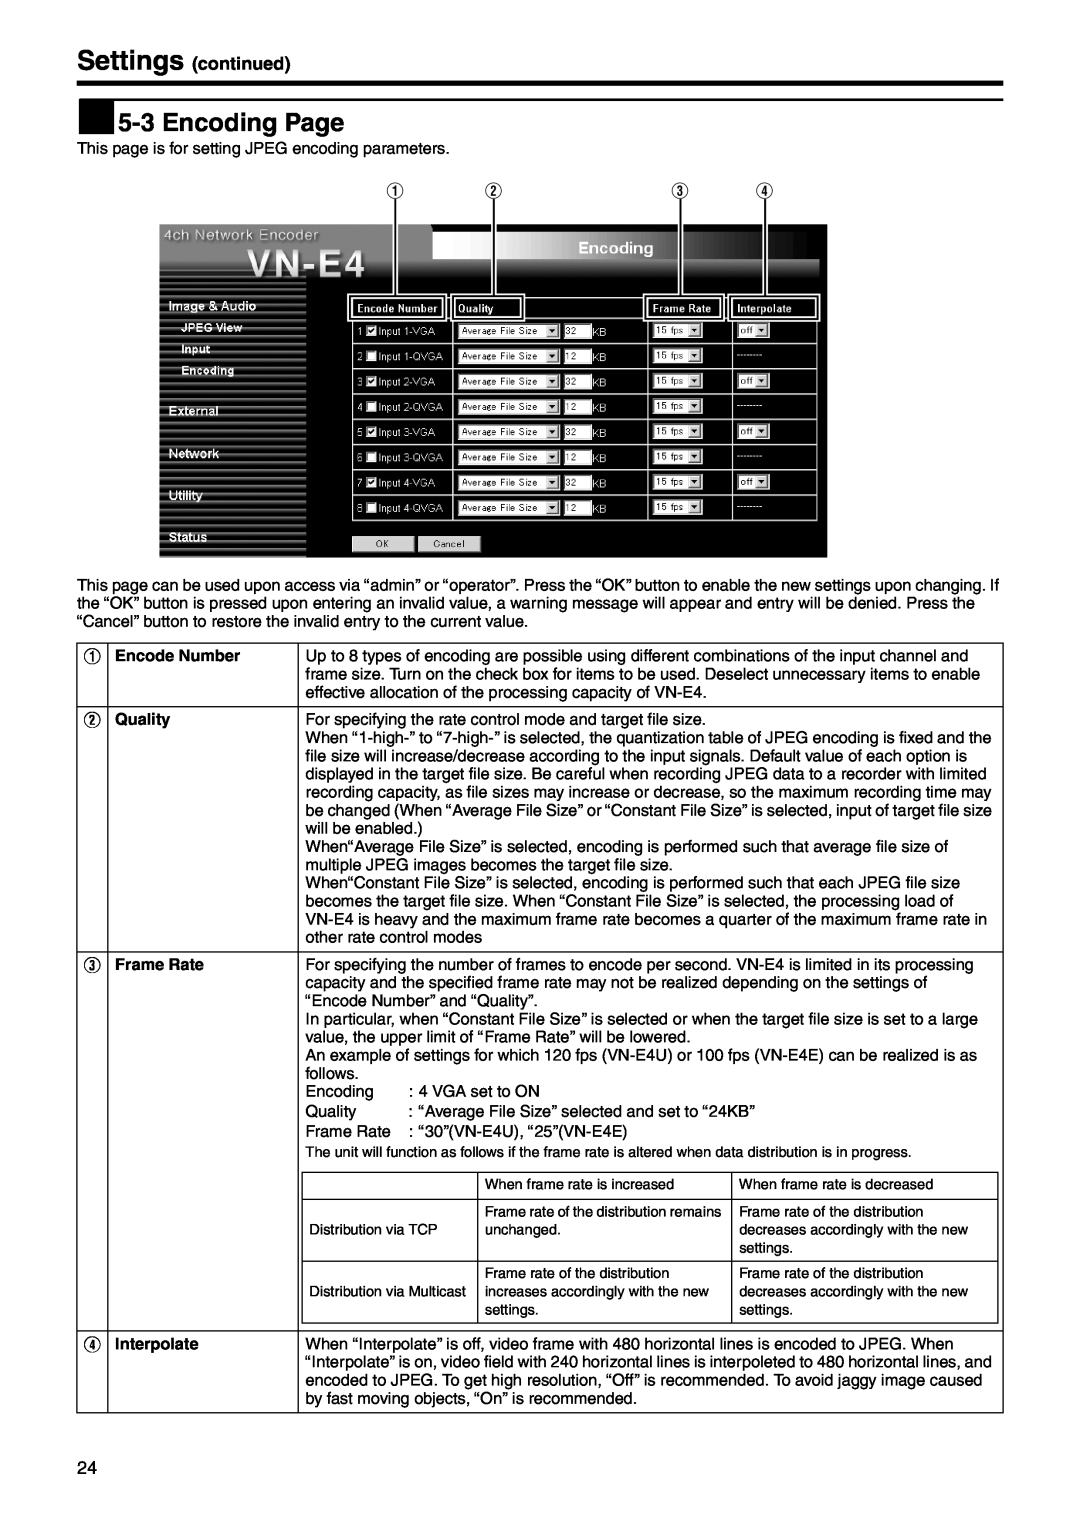 JVC VN-E4 manual  5-3 Encoding Page, Encode Number, Quality, Frame Rate, Interpolate 